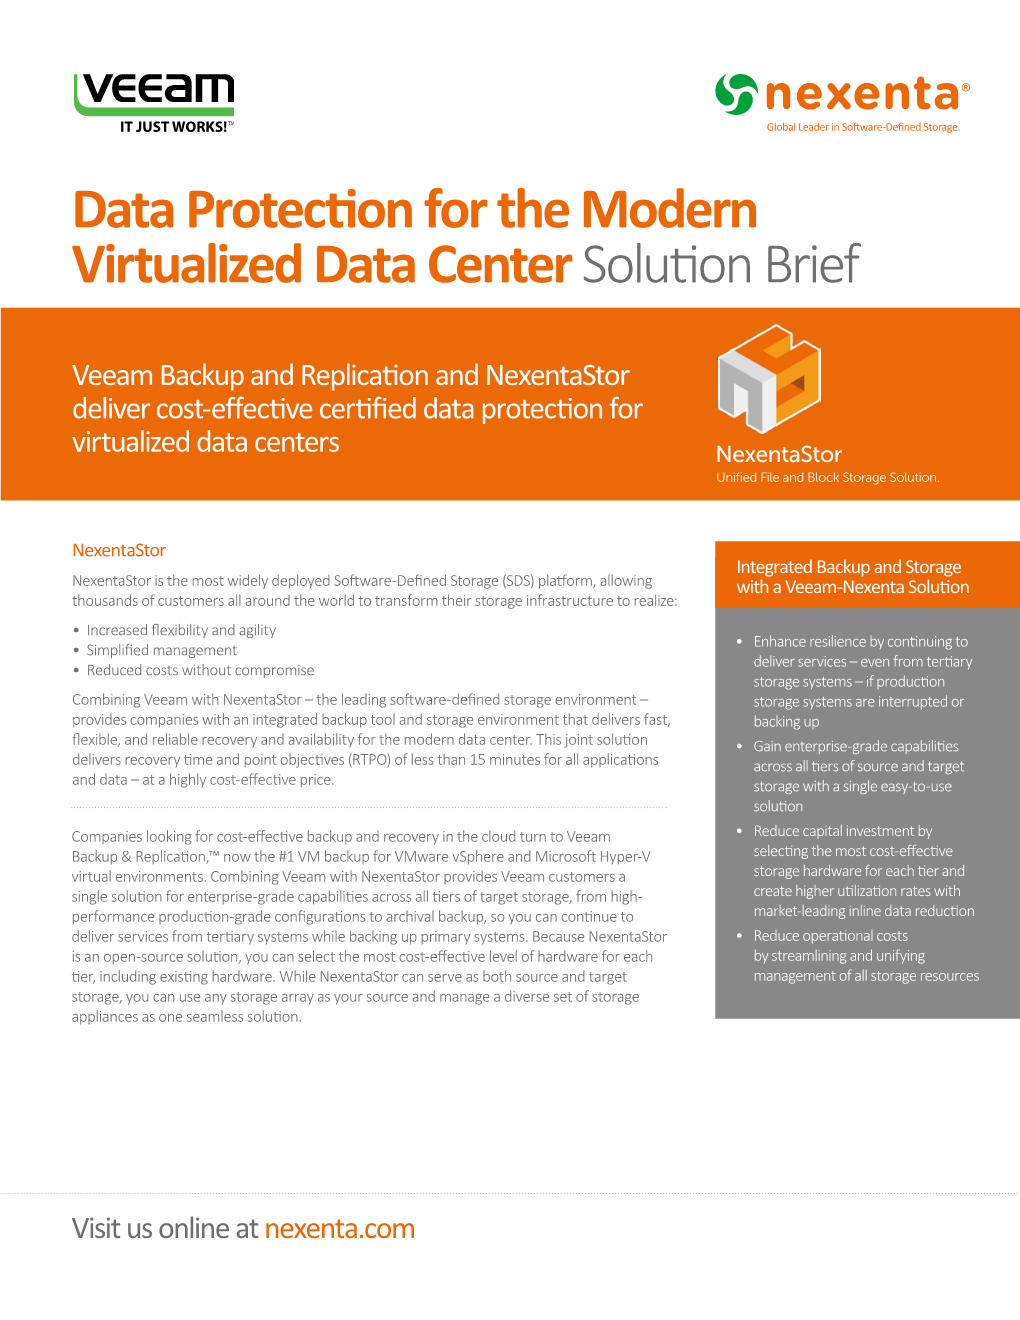 Data Protection for the Modern Virtualized Data Center Solution Brief